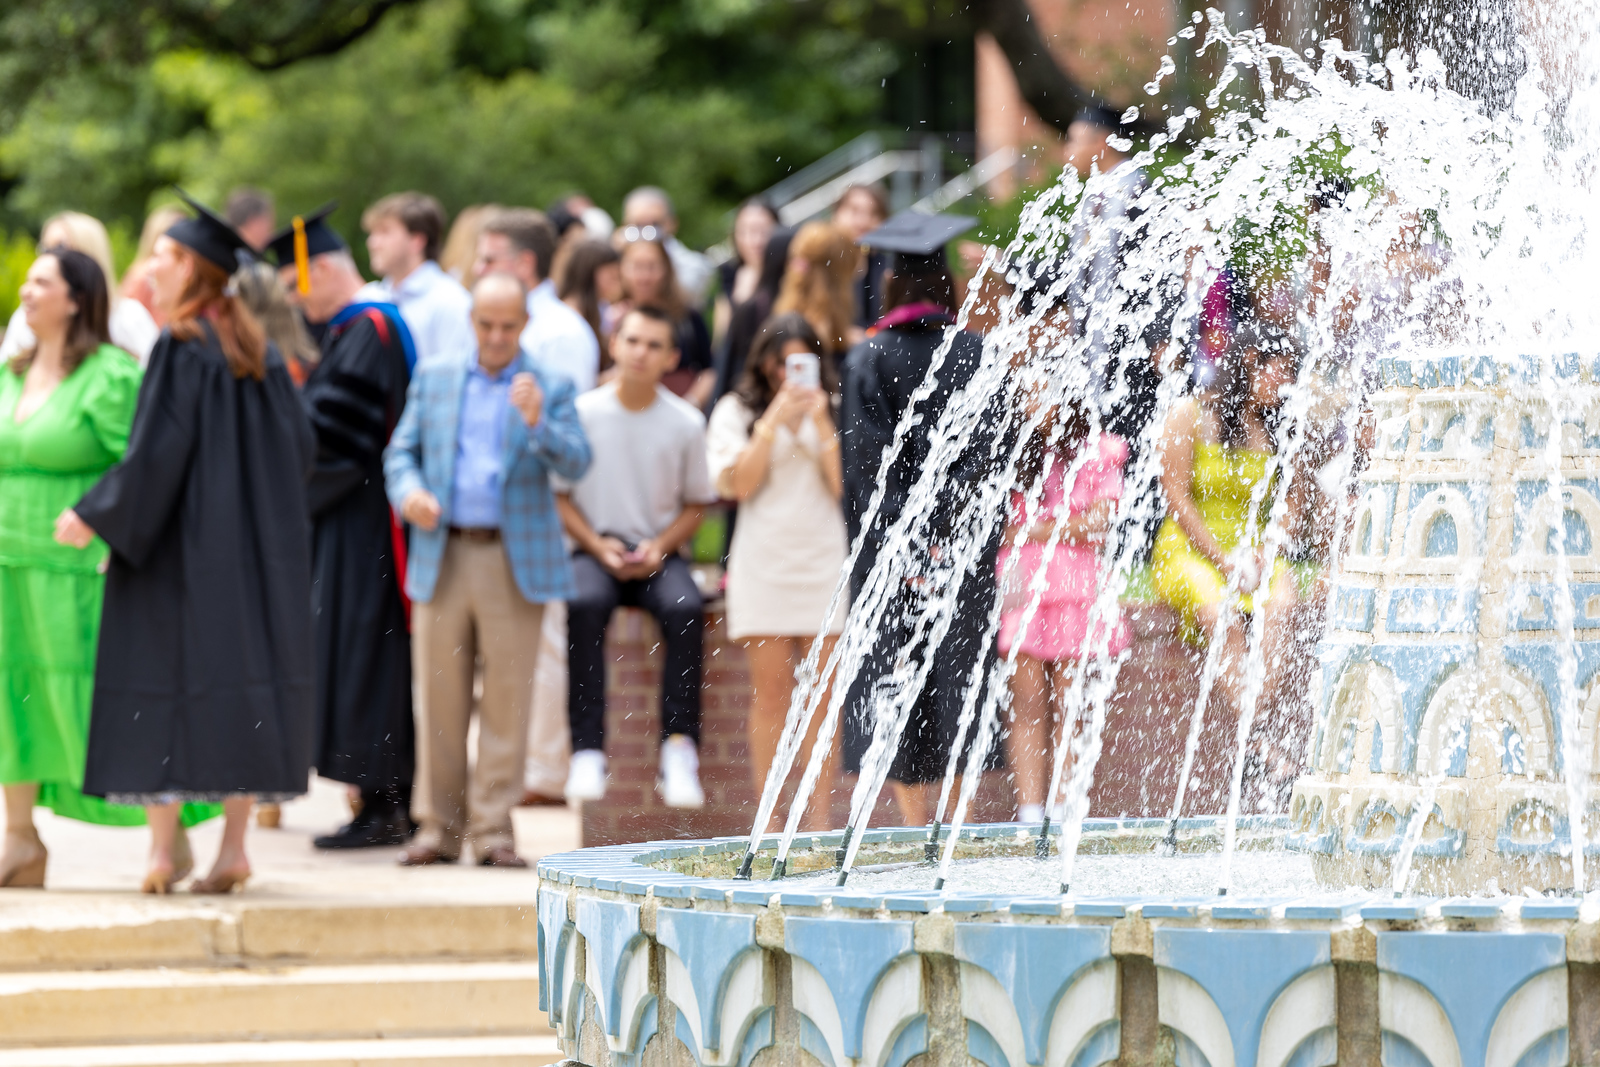 Students and families around miller fountain for commencement